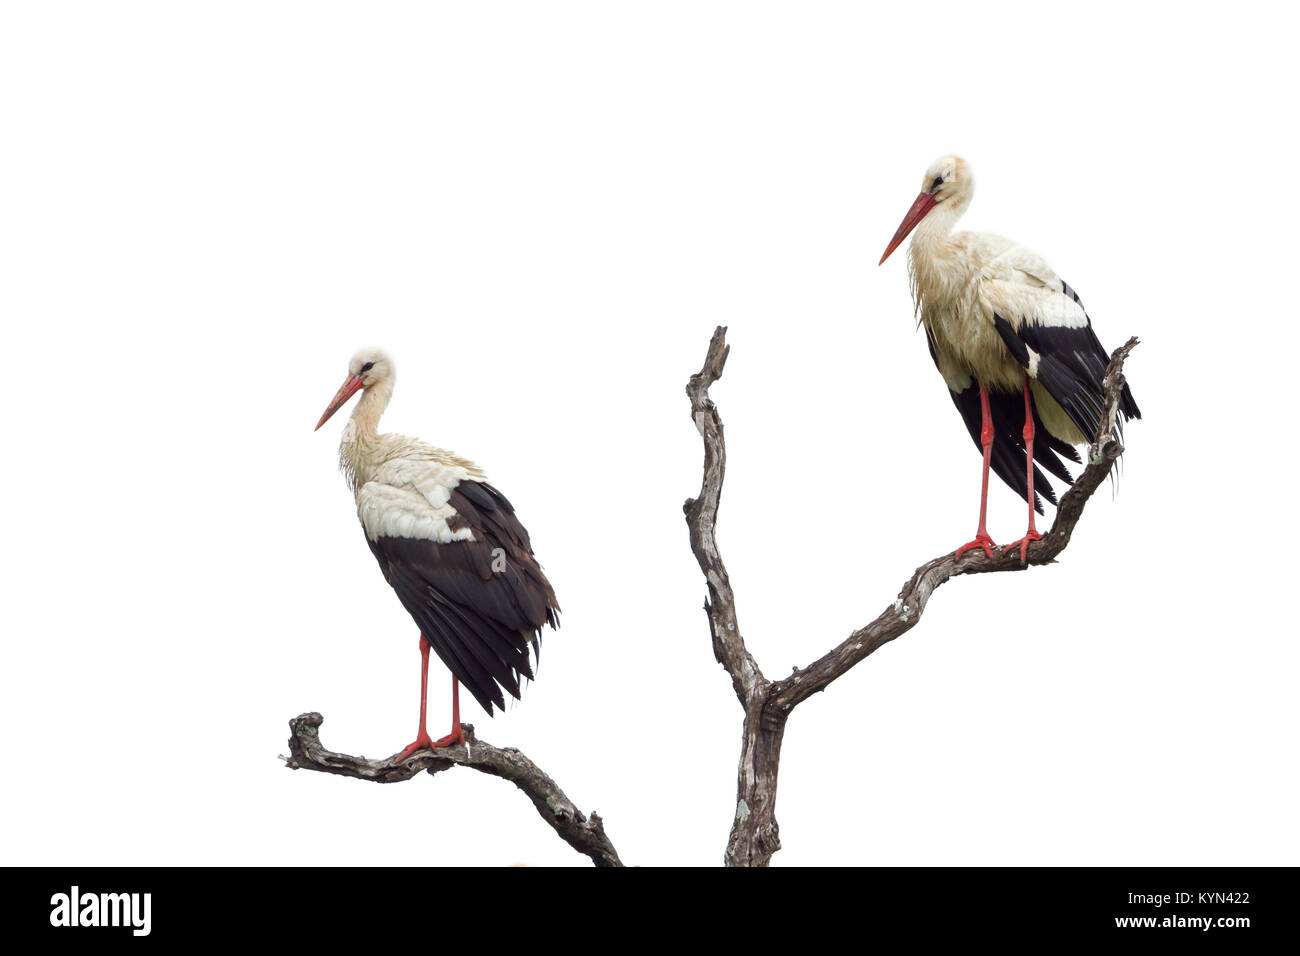 White stork isolated in white background ; Specie Ciconia ciconia family of Ciconiidae Stock Photo